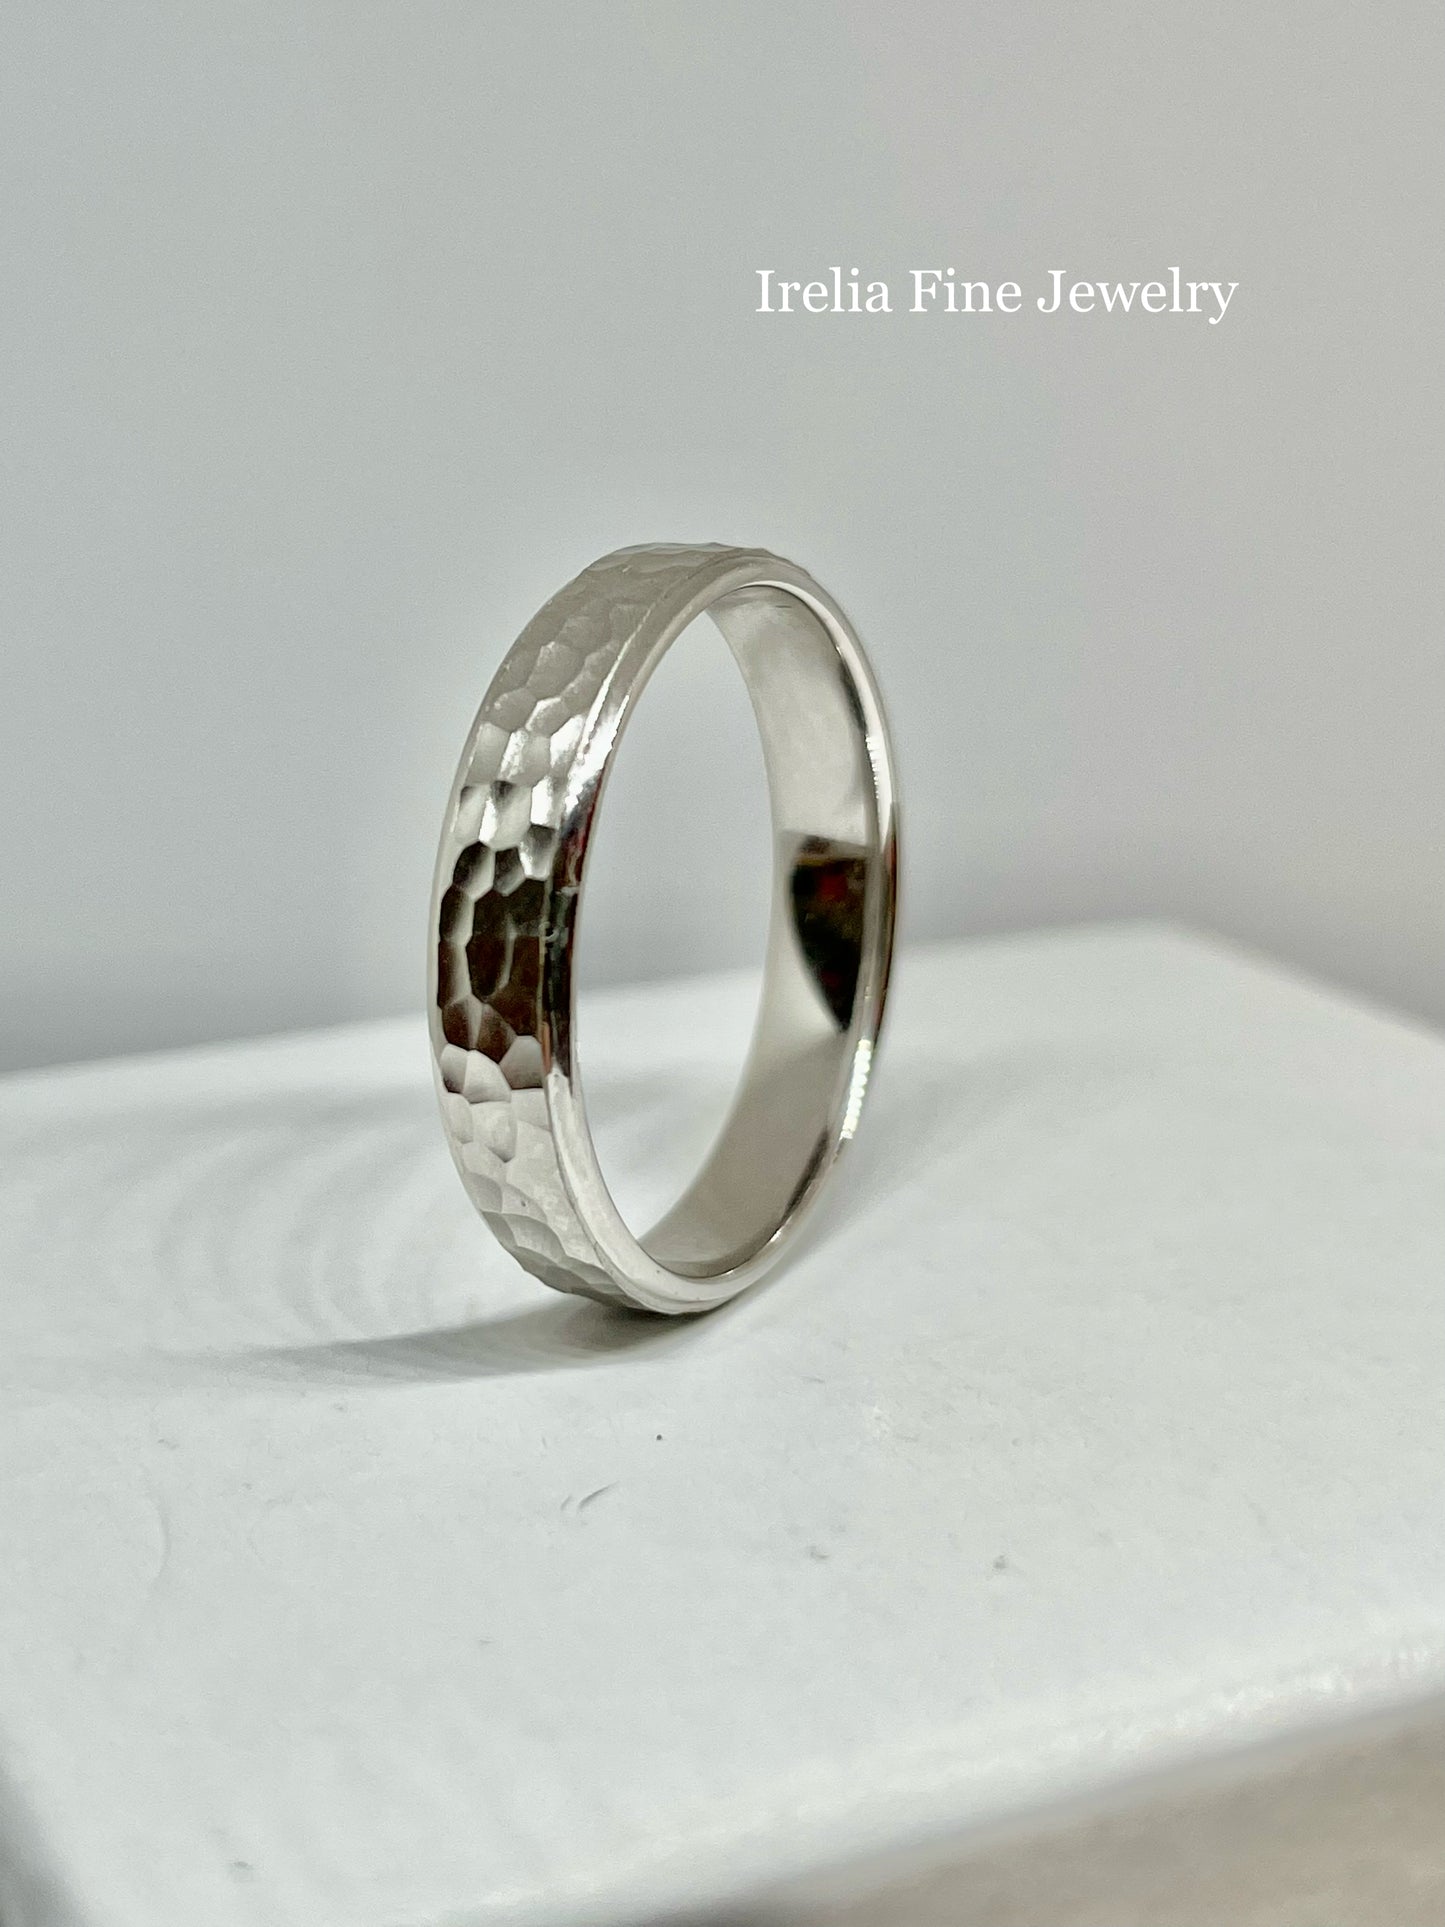 CrownRing Collection - 14k White Gold 4.5 mm textured center band